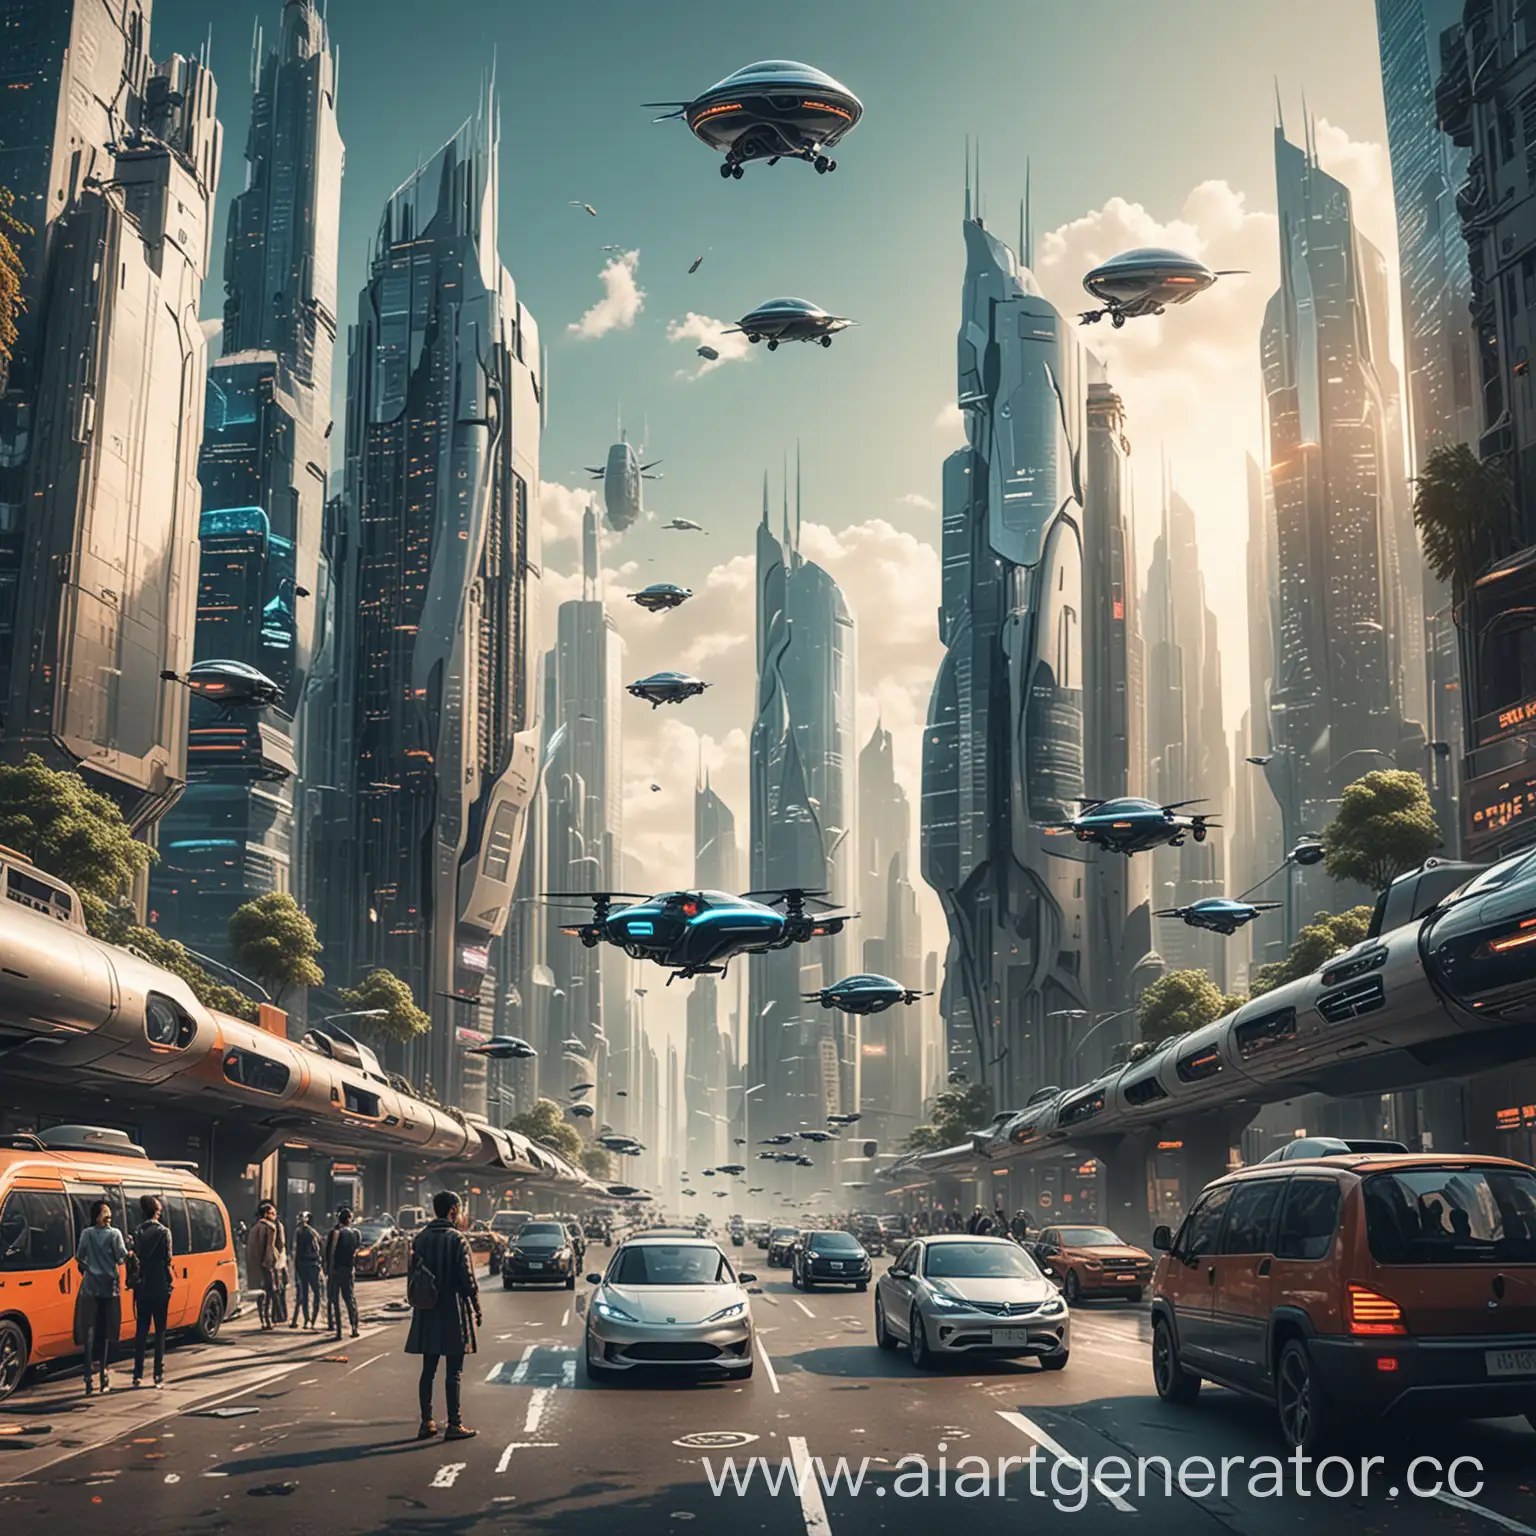 Futuristic-Cityscape-with-AIEmpowered-Citizens-Embracing-Tomorrows-Technologies